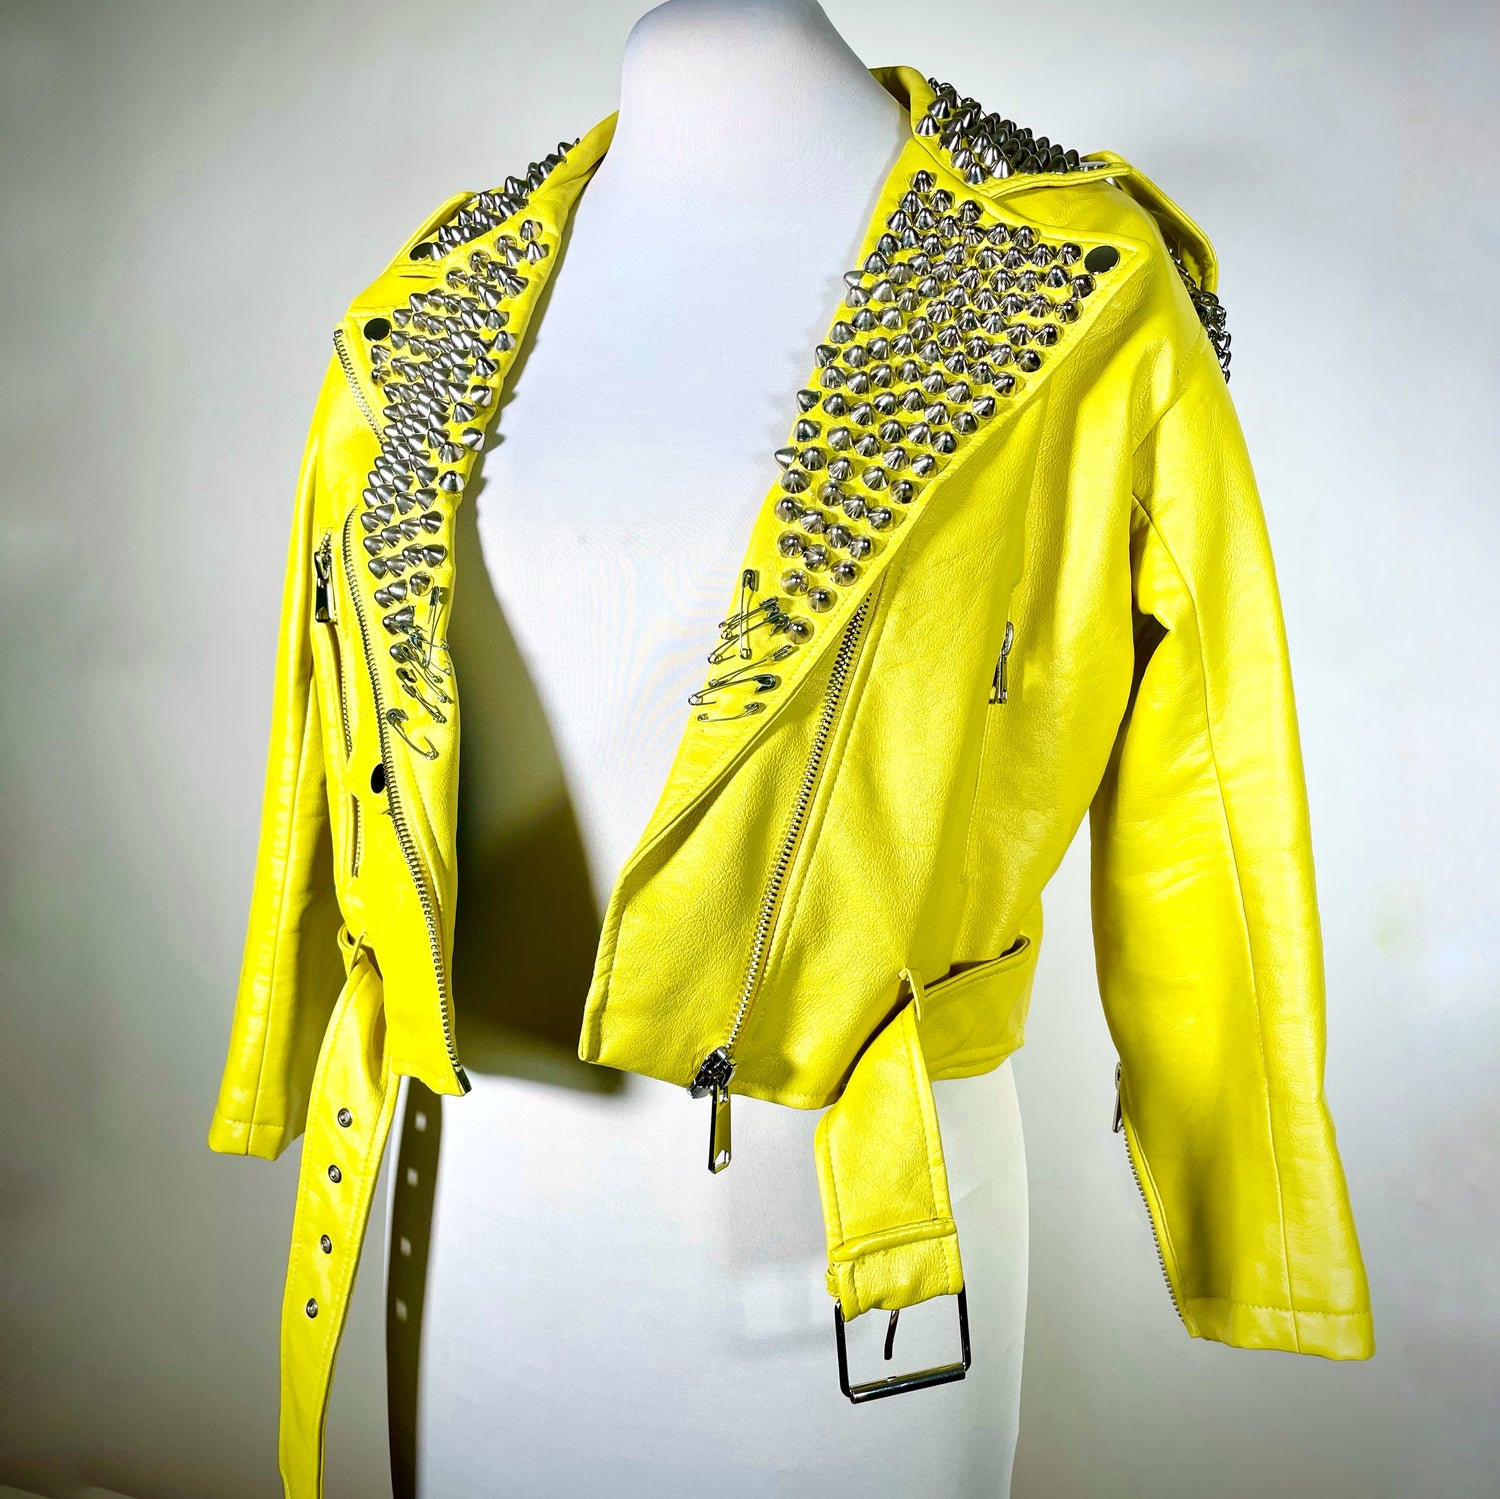 Yellow moto jacket with studs crosses chains tradgoth goth industrial cyberpunk punk deathrock 